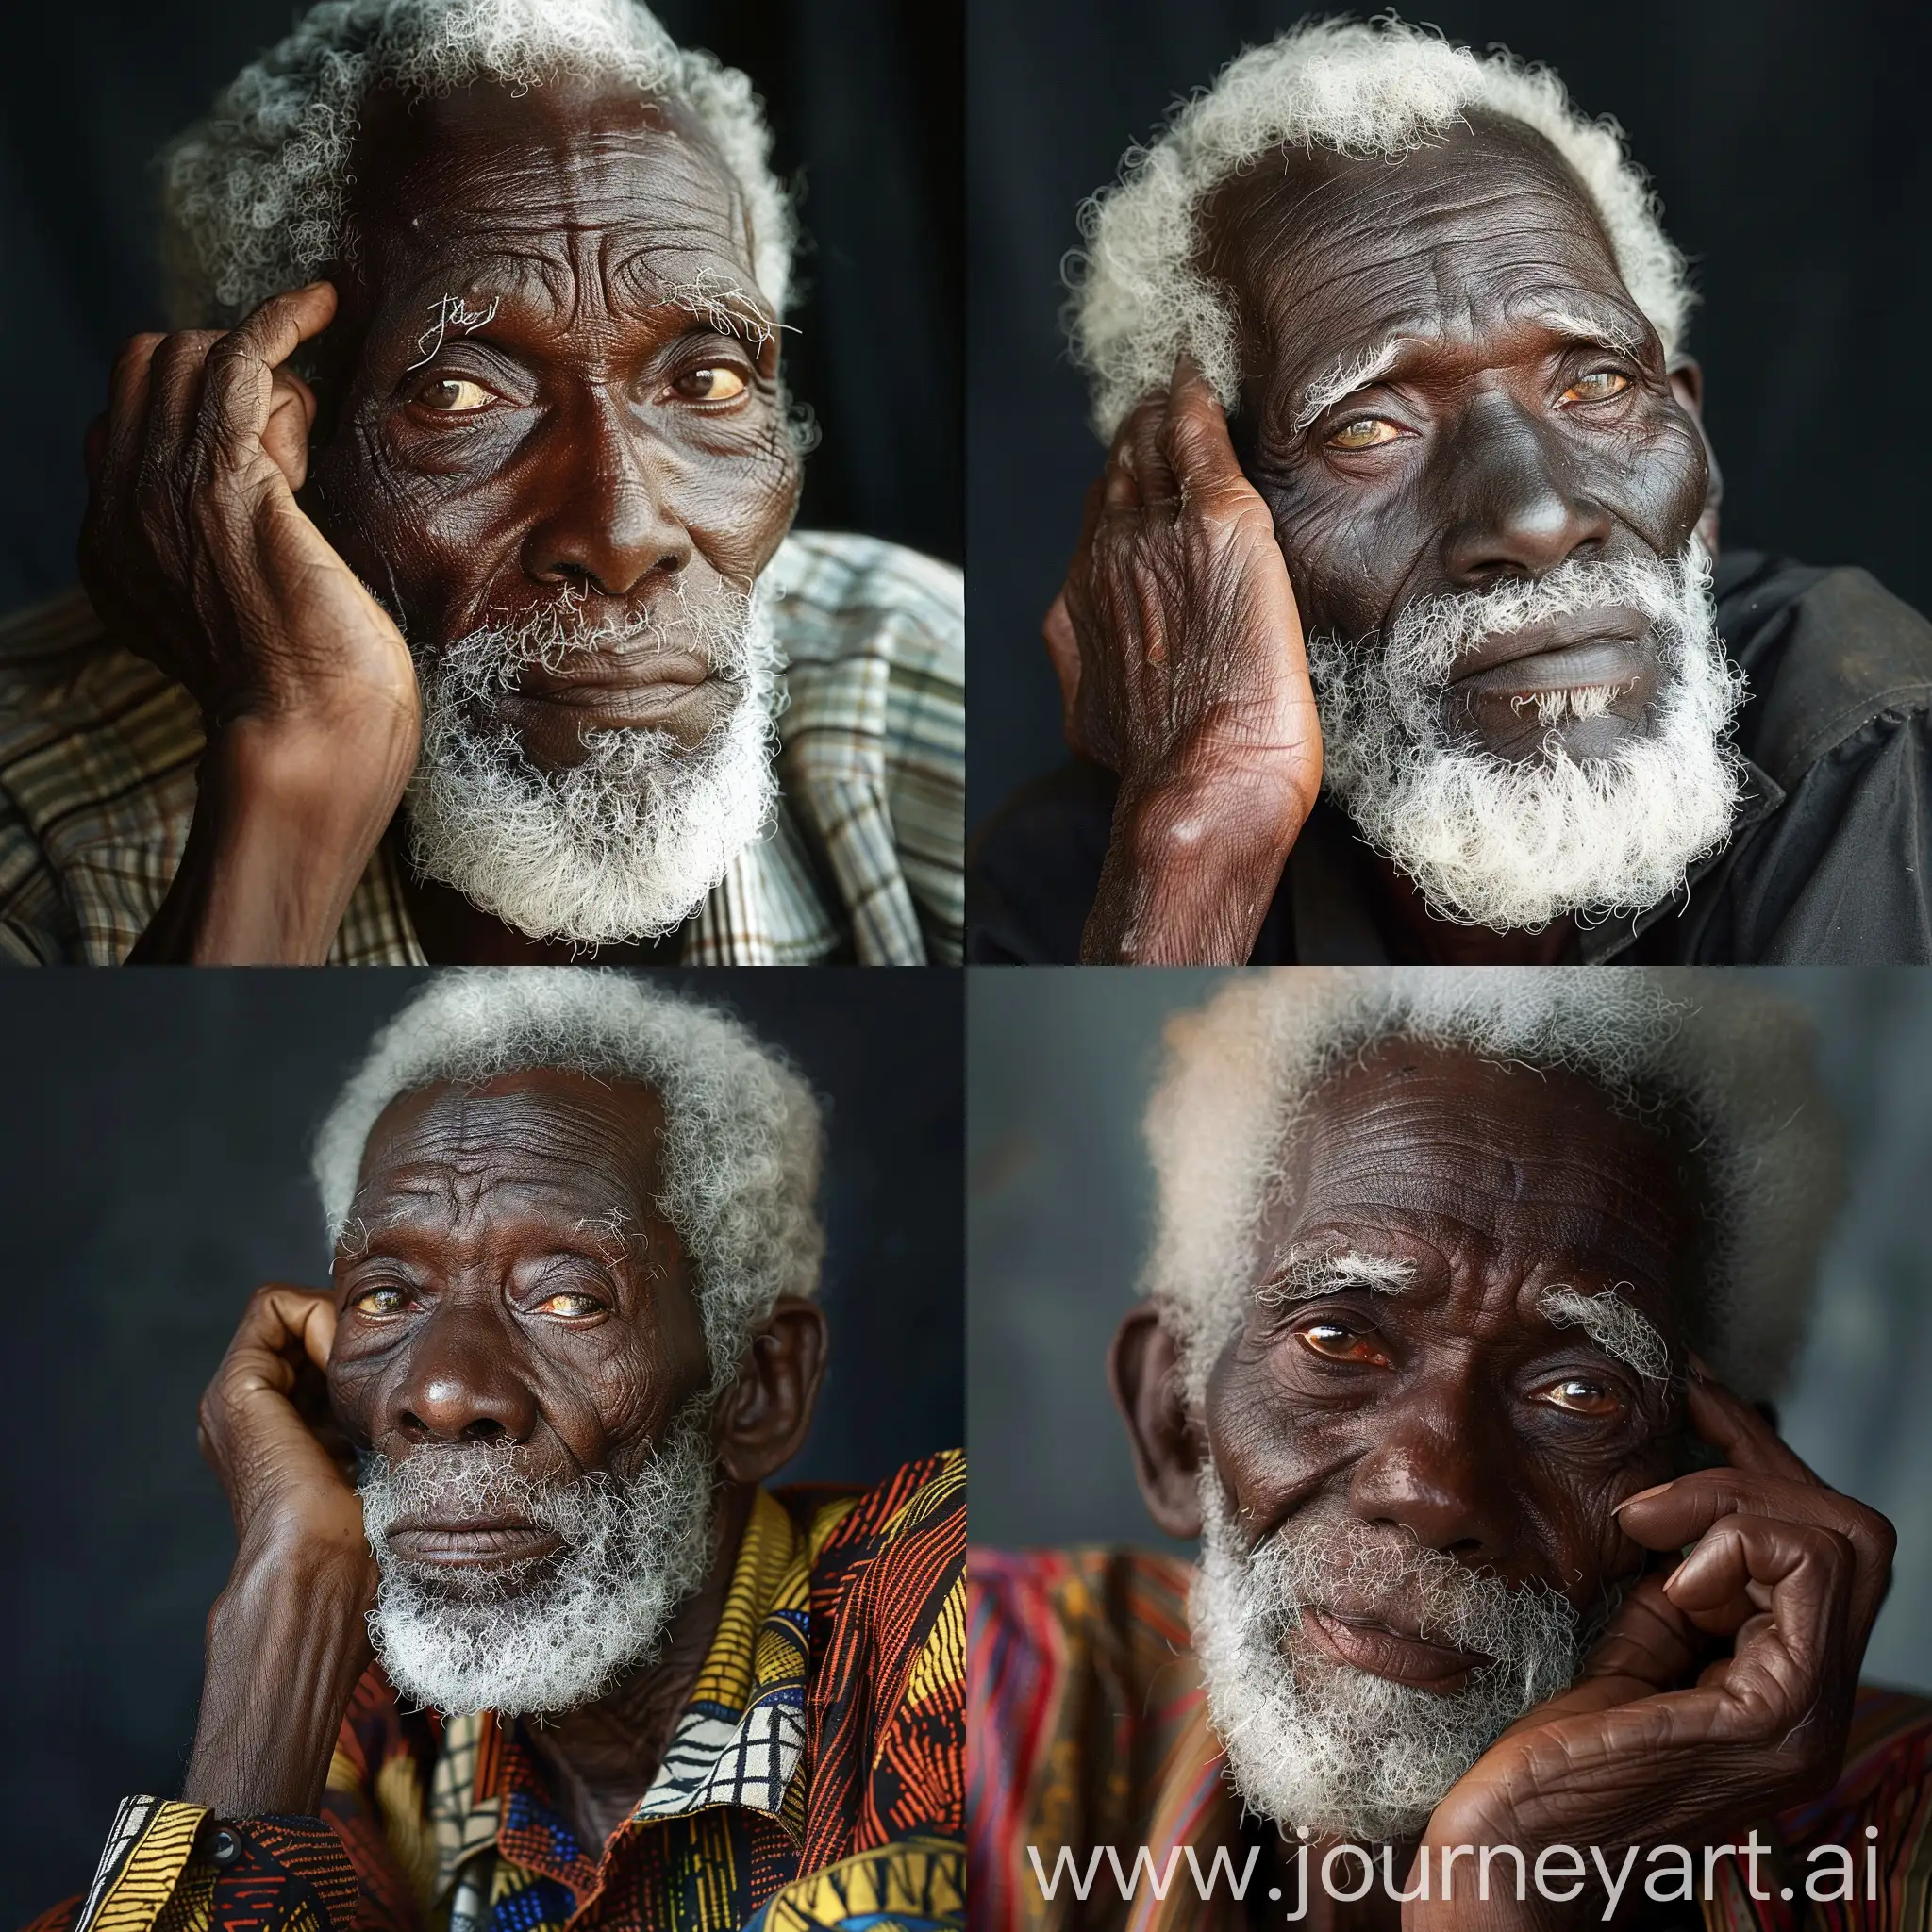 Old African man with white beard.he’s resting his left hand on his cheek